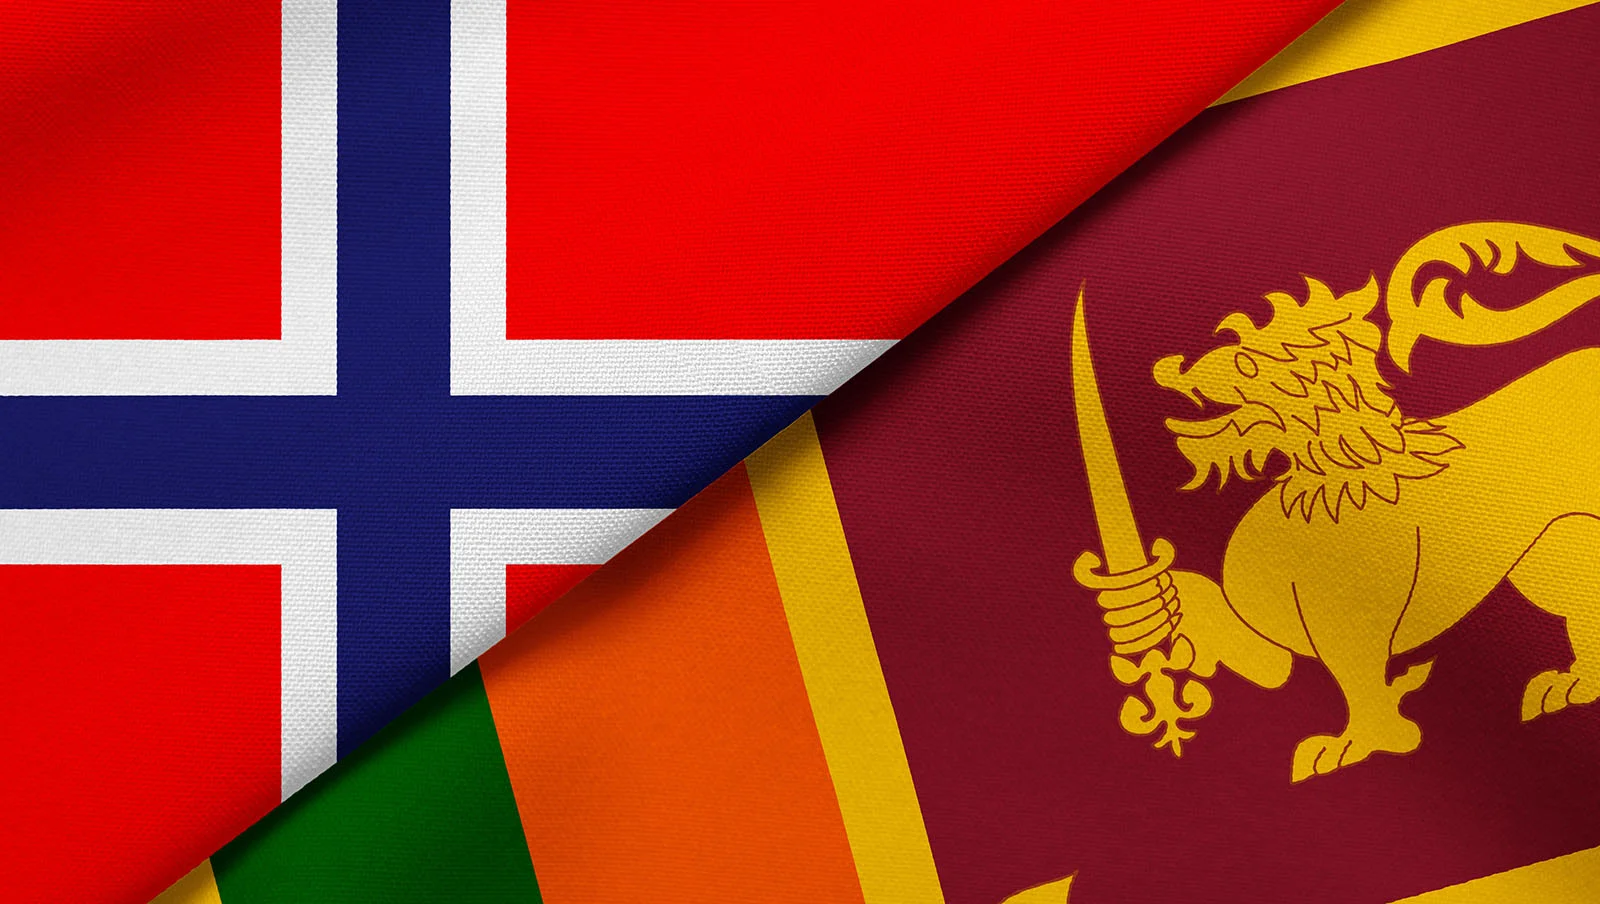 The folded flags of Norway and Sri Lanka